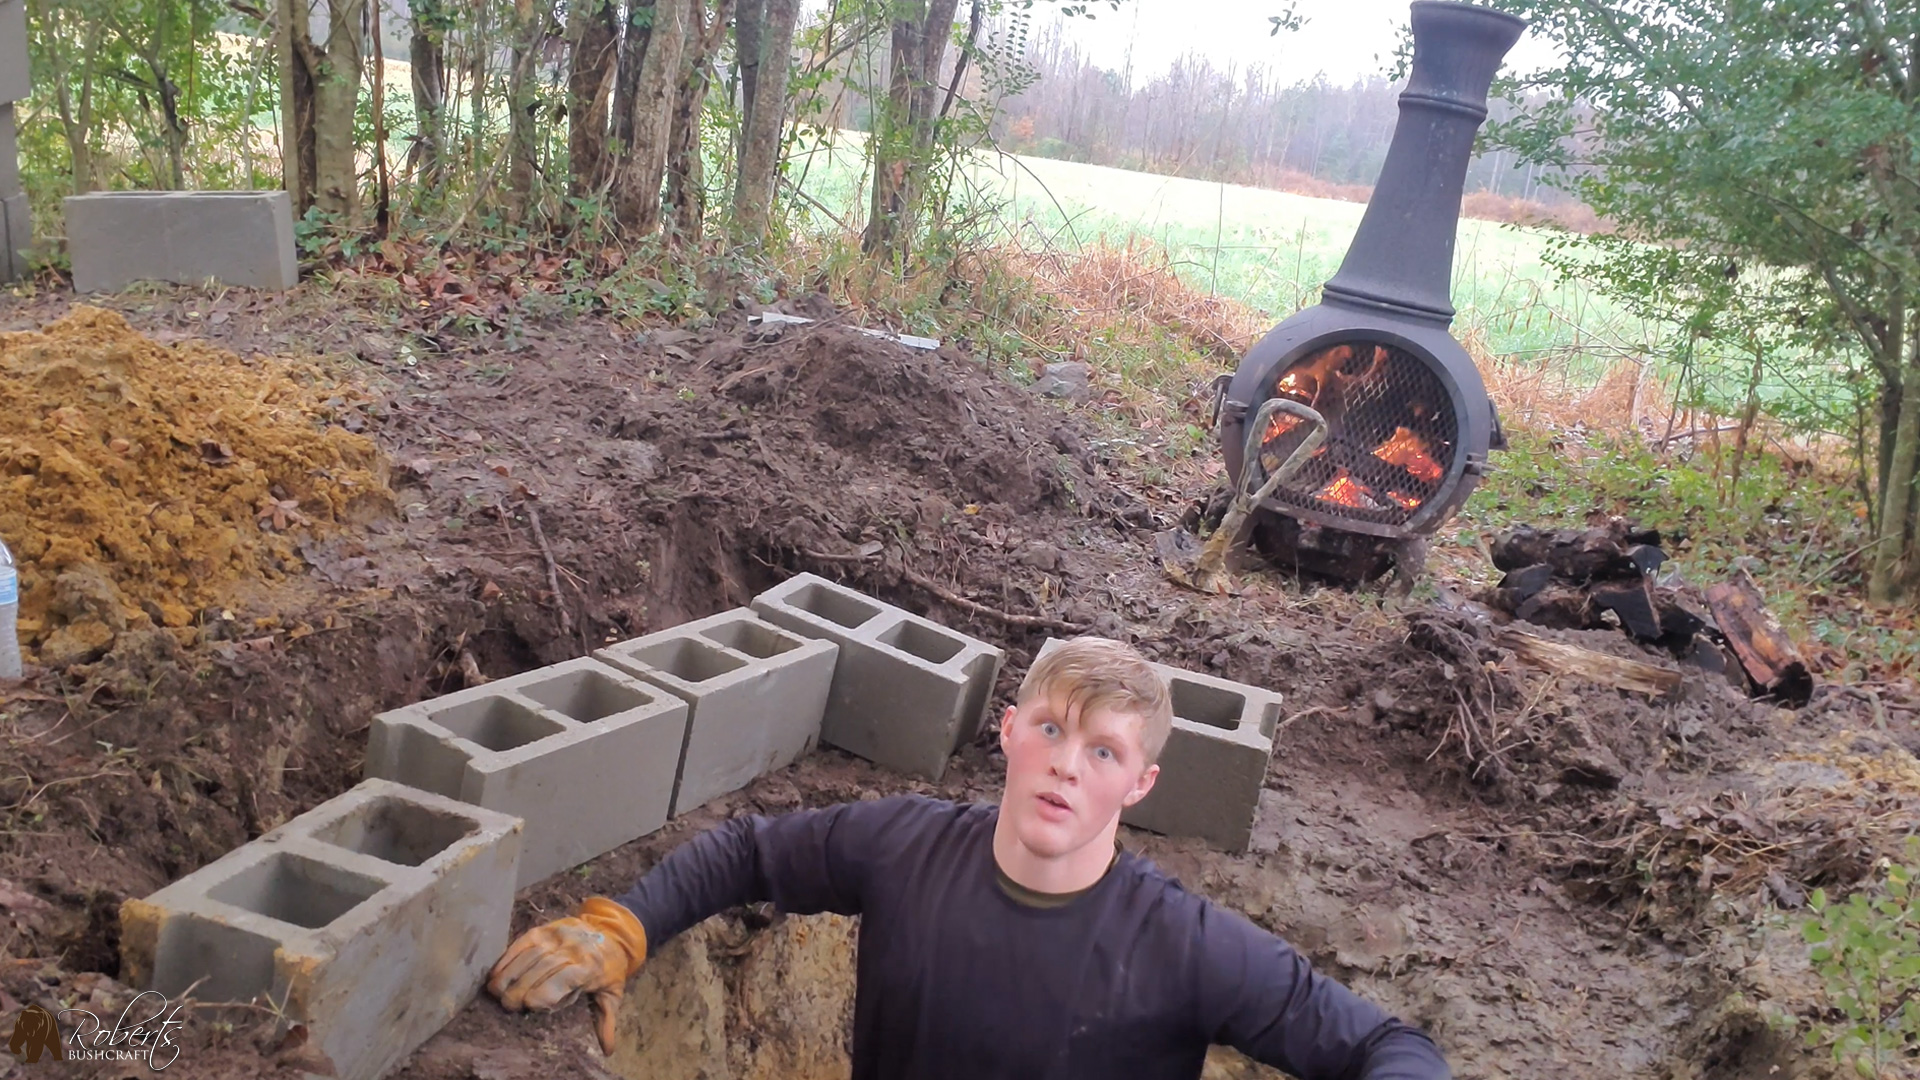 Digging an outhouse hole in the rain is no fun